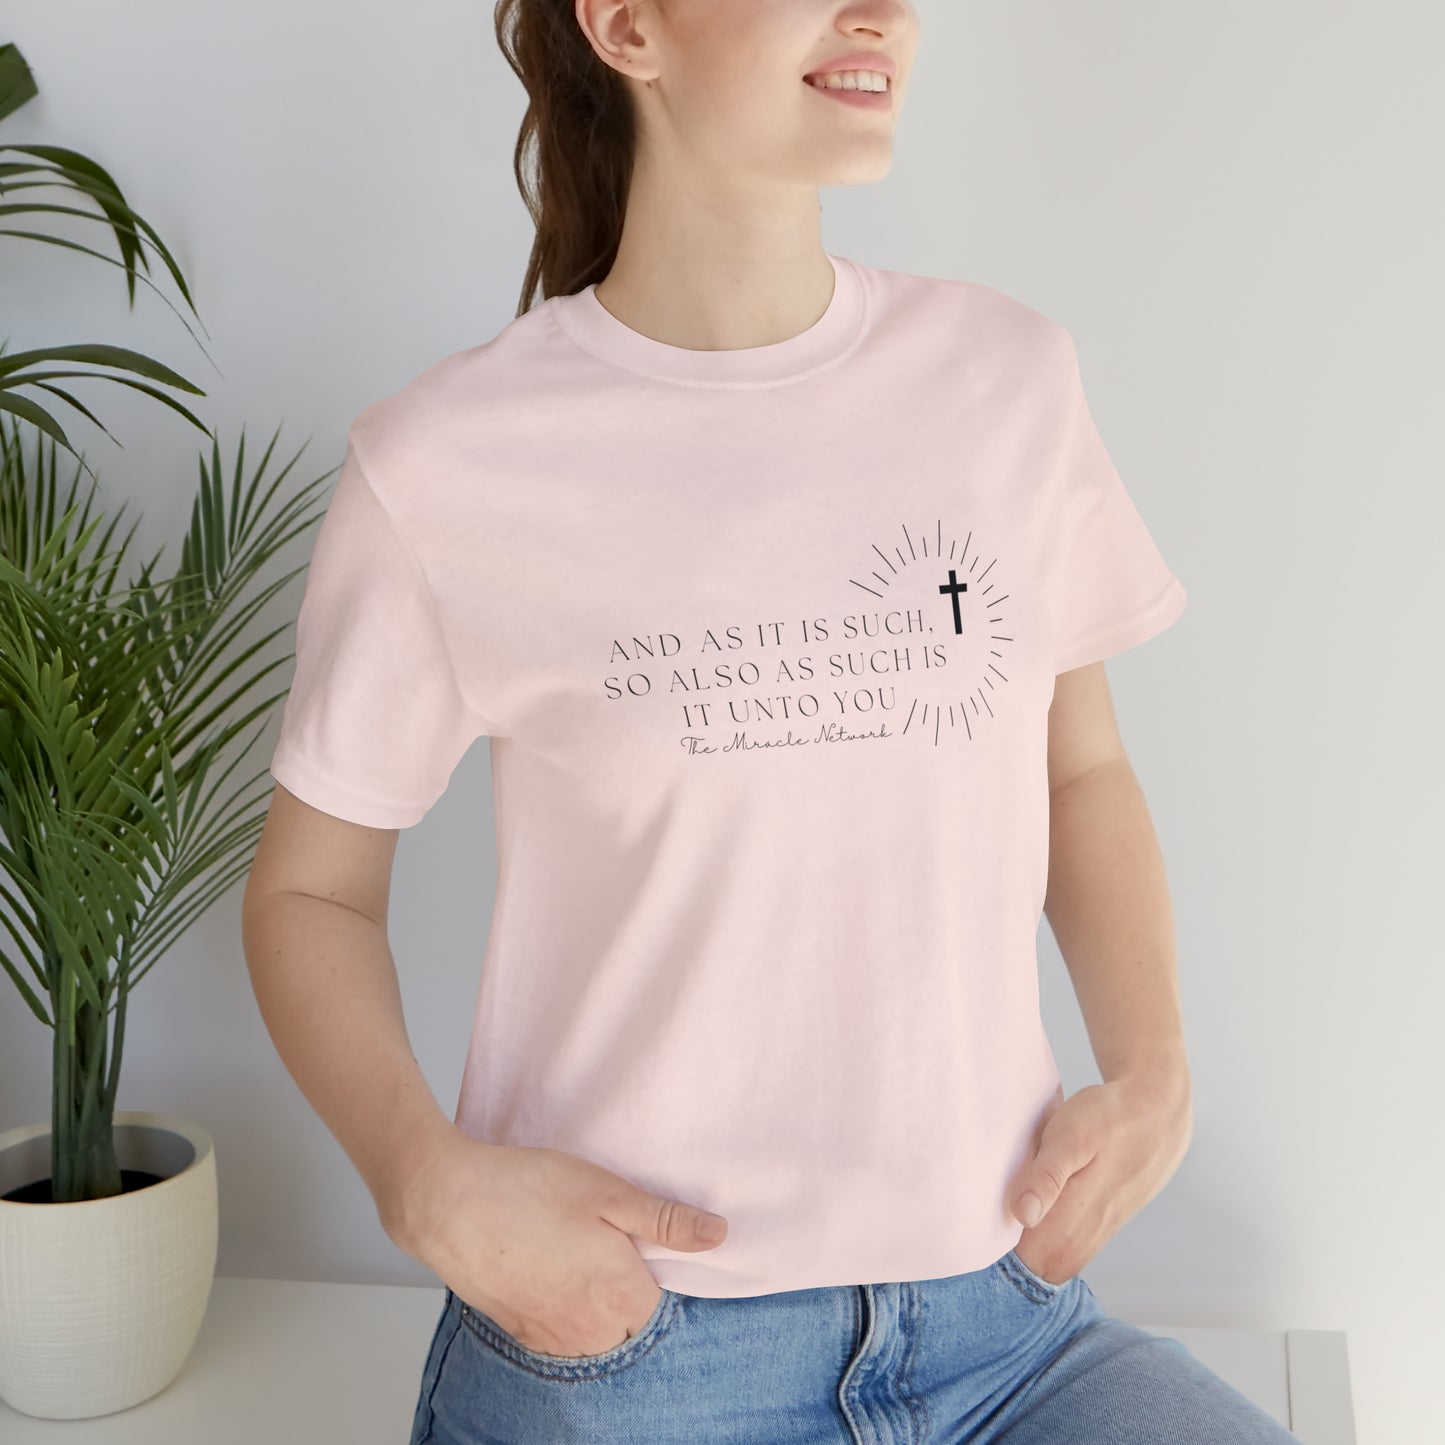 Arrested Development "And as it is such" Short Sleeve Tee